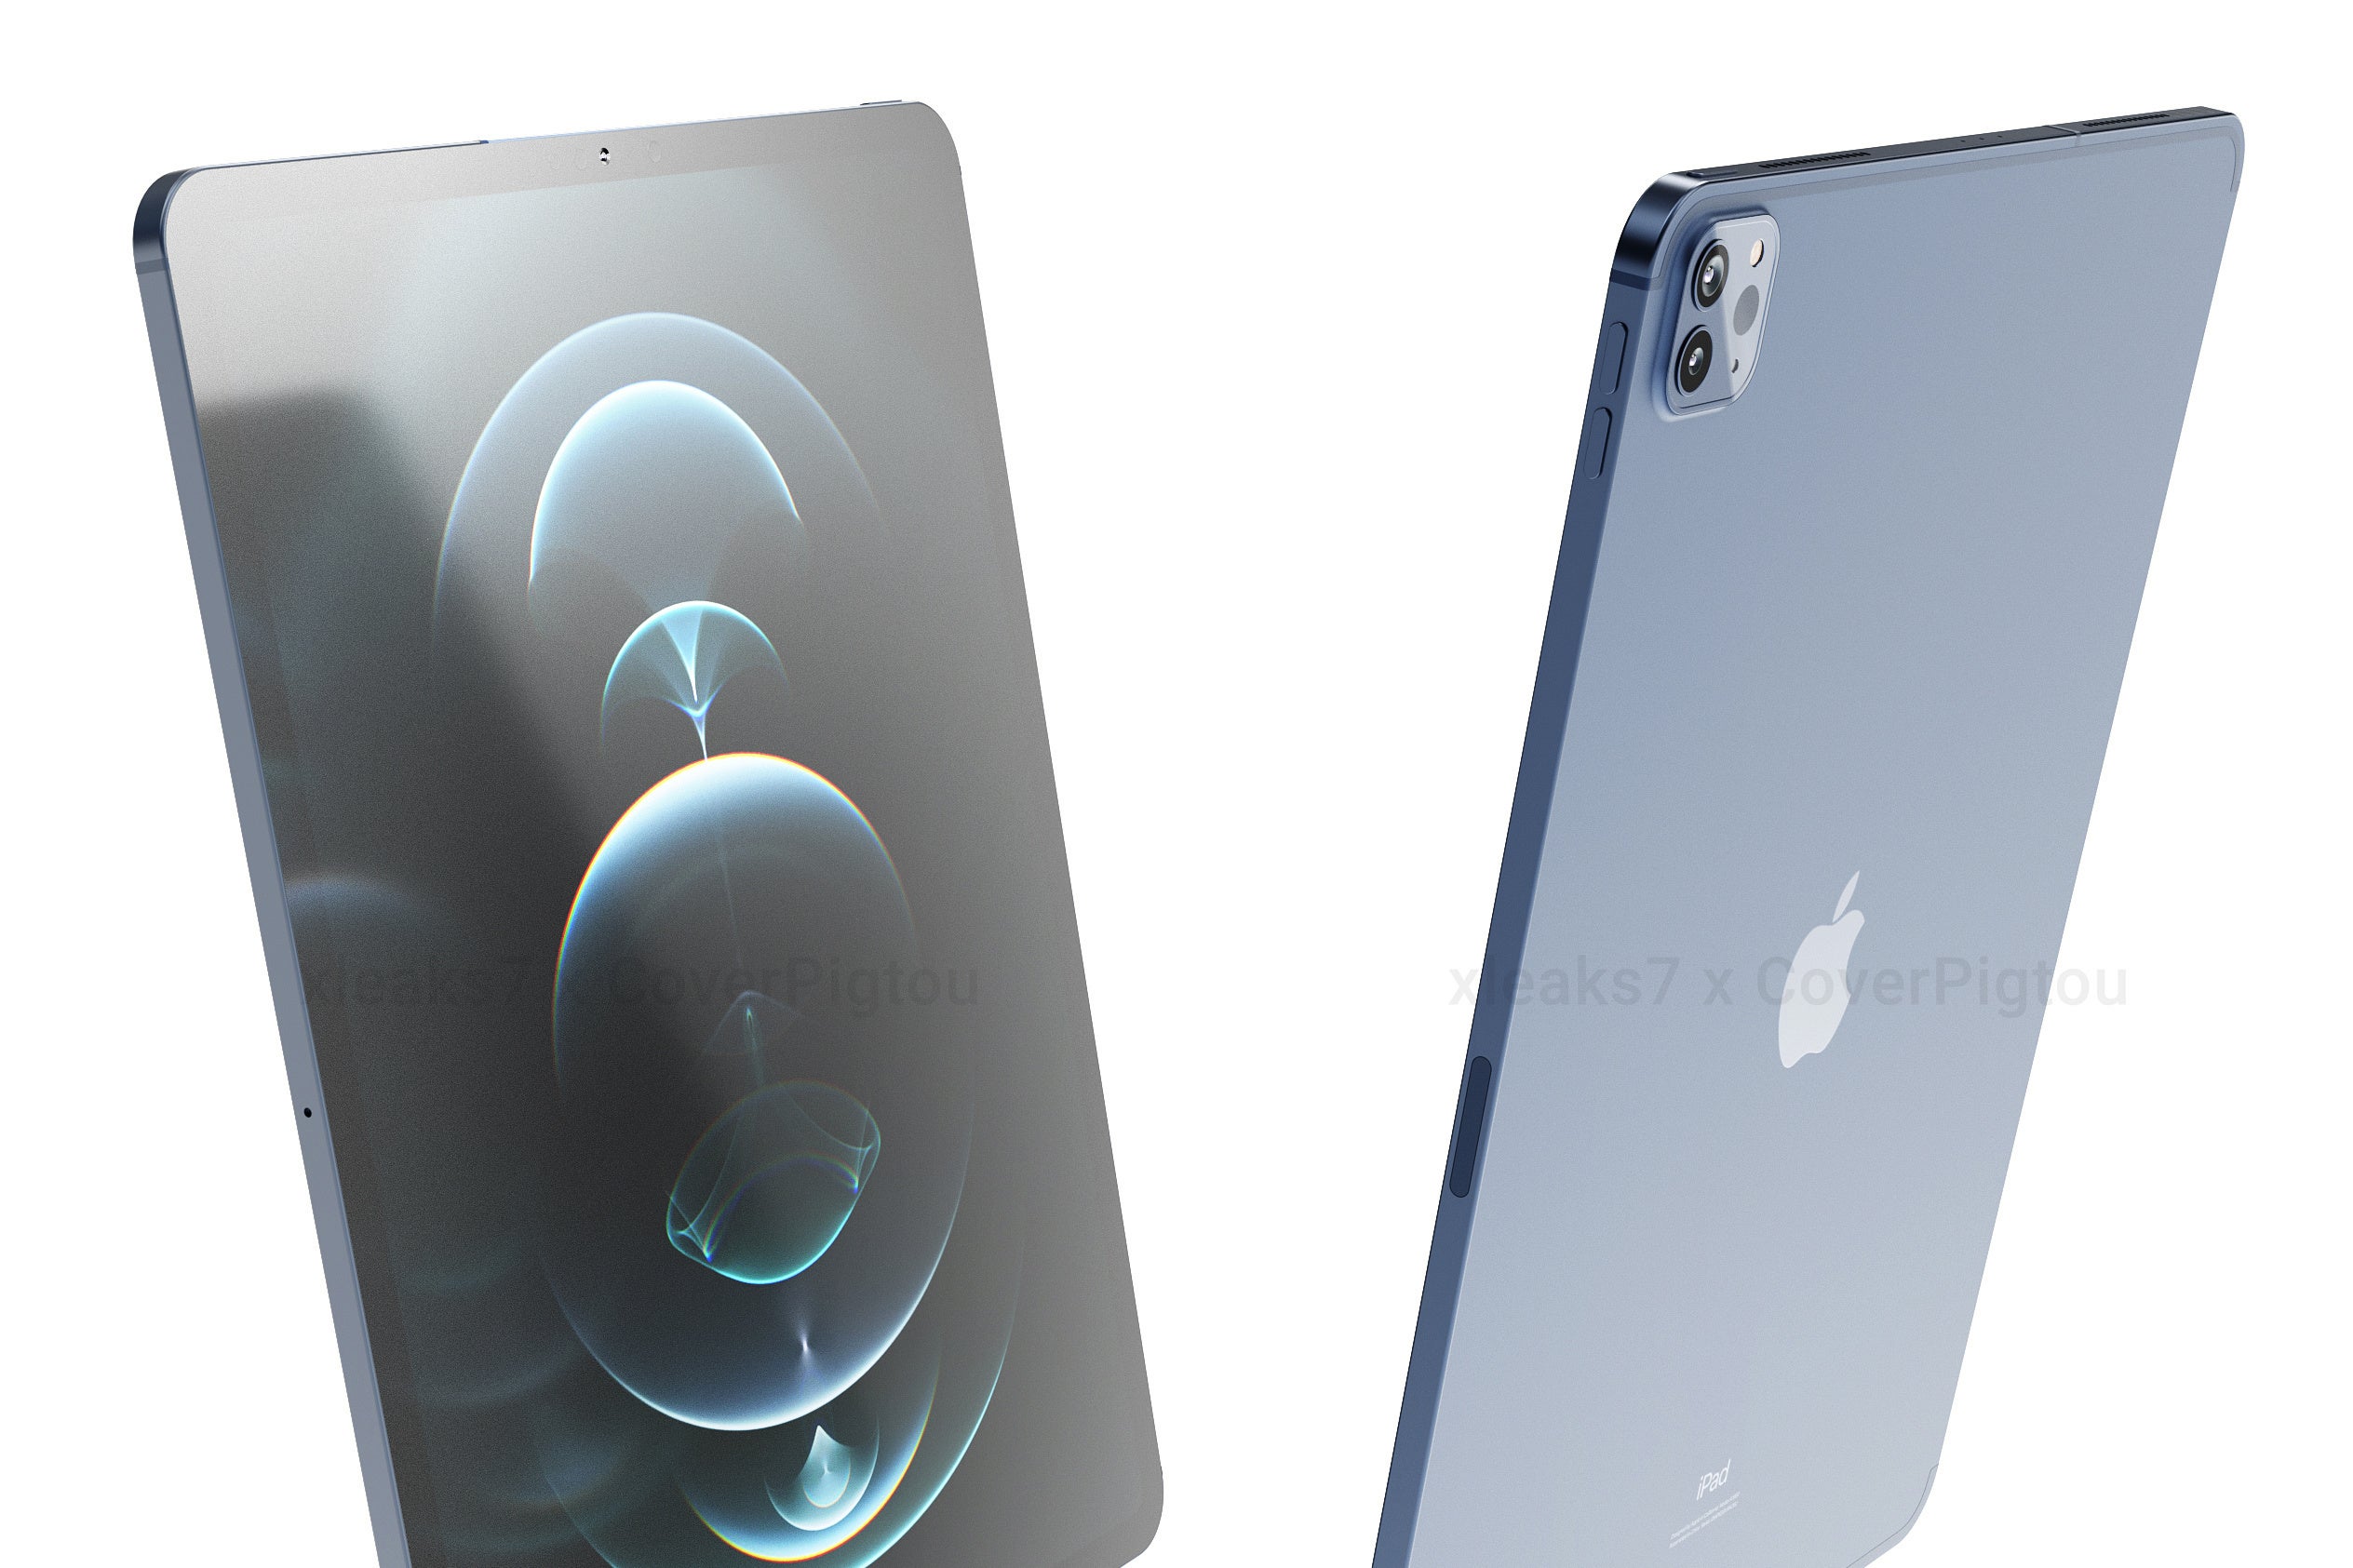 Apple's mini-LED iPad Pro (2021) again tipped to launch this month